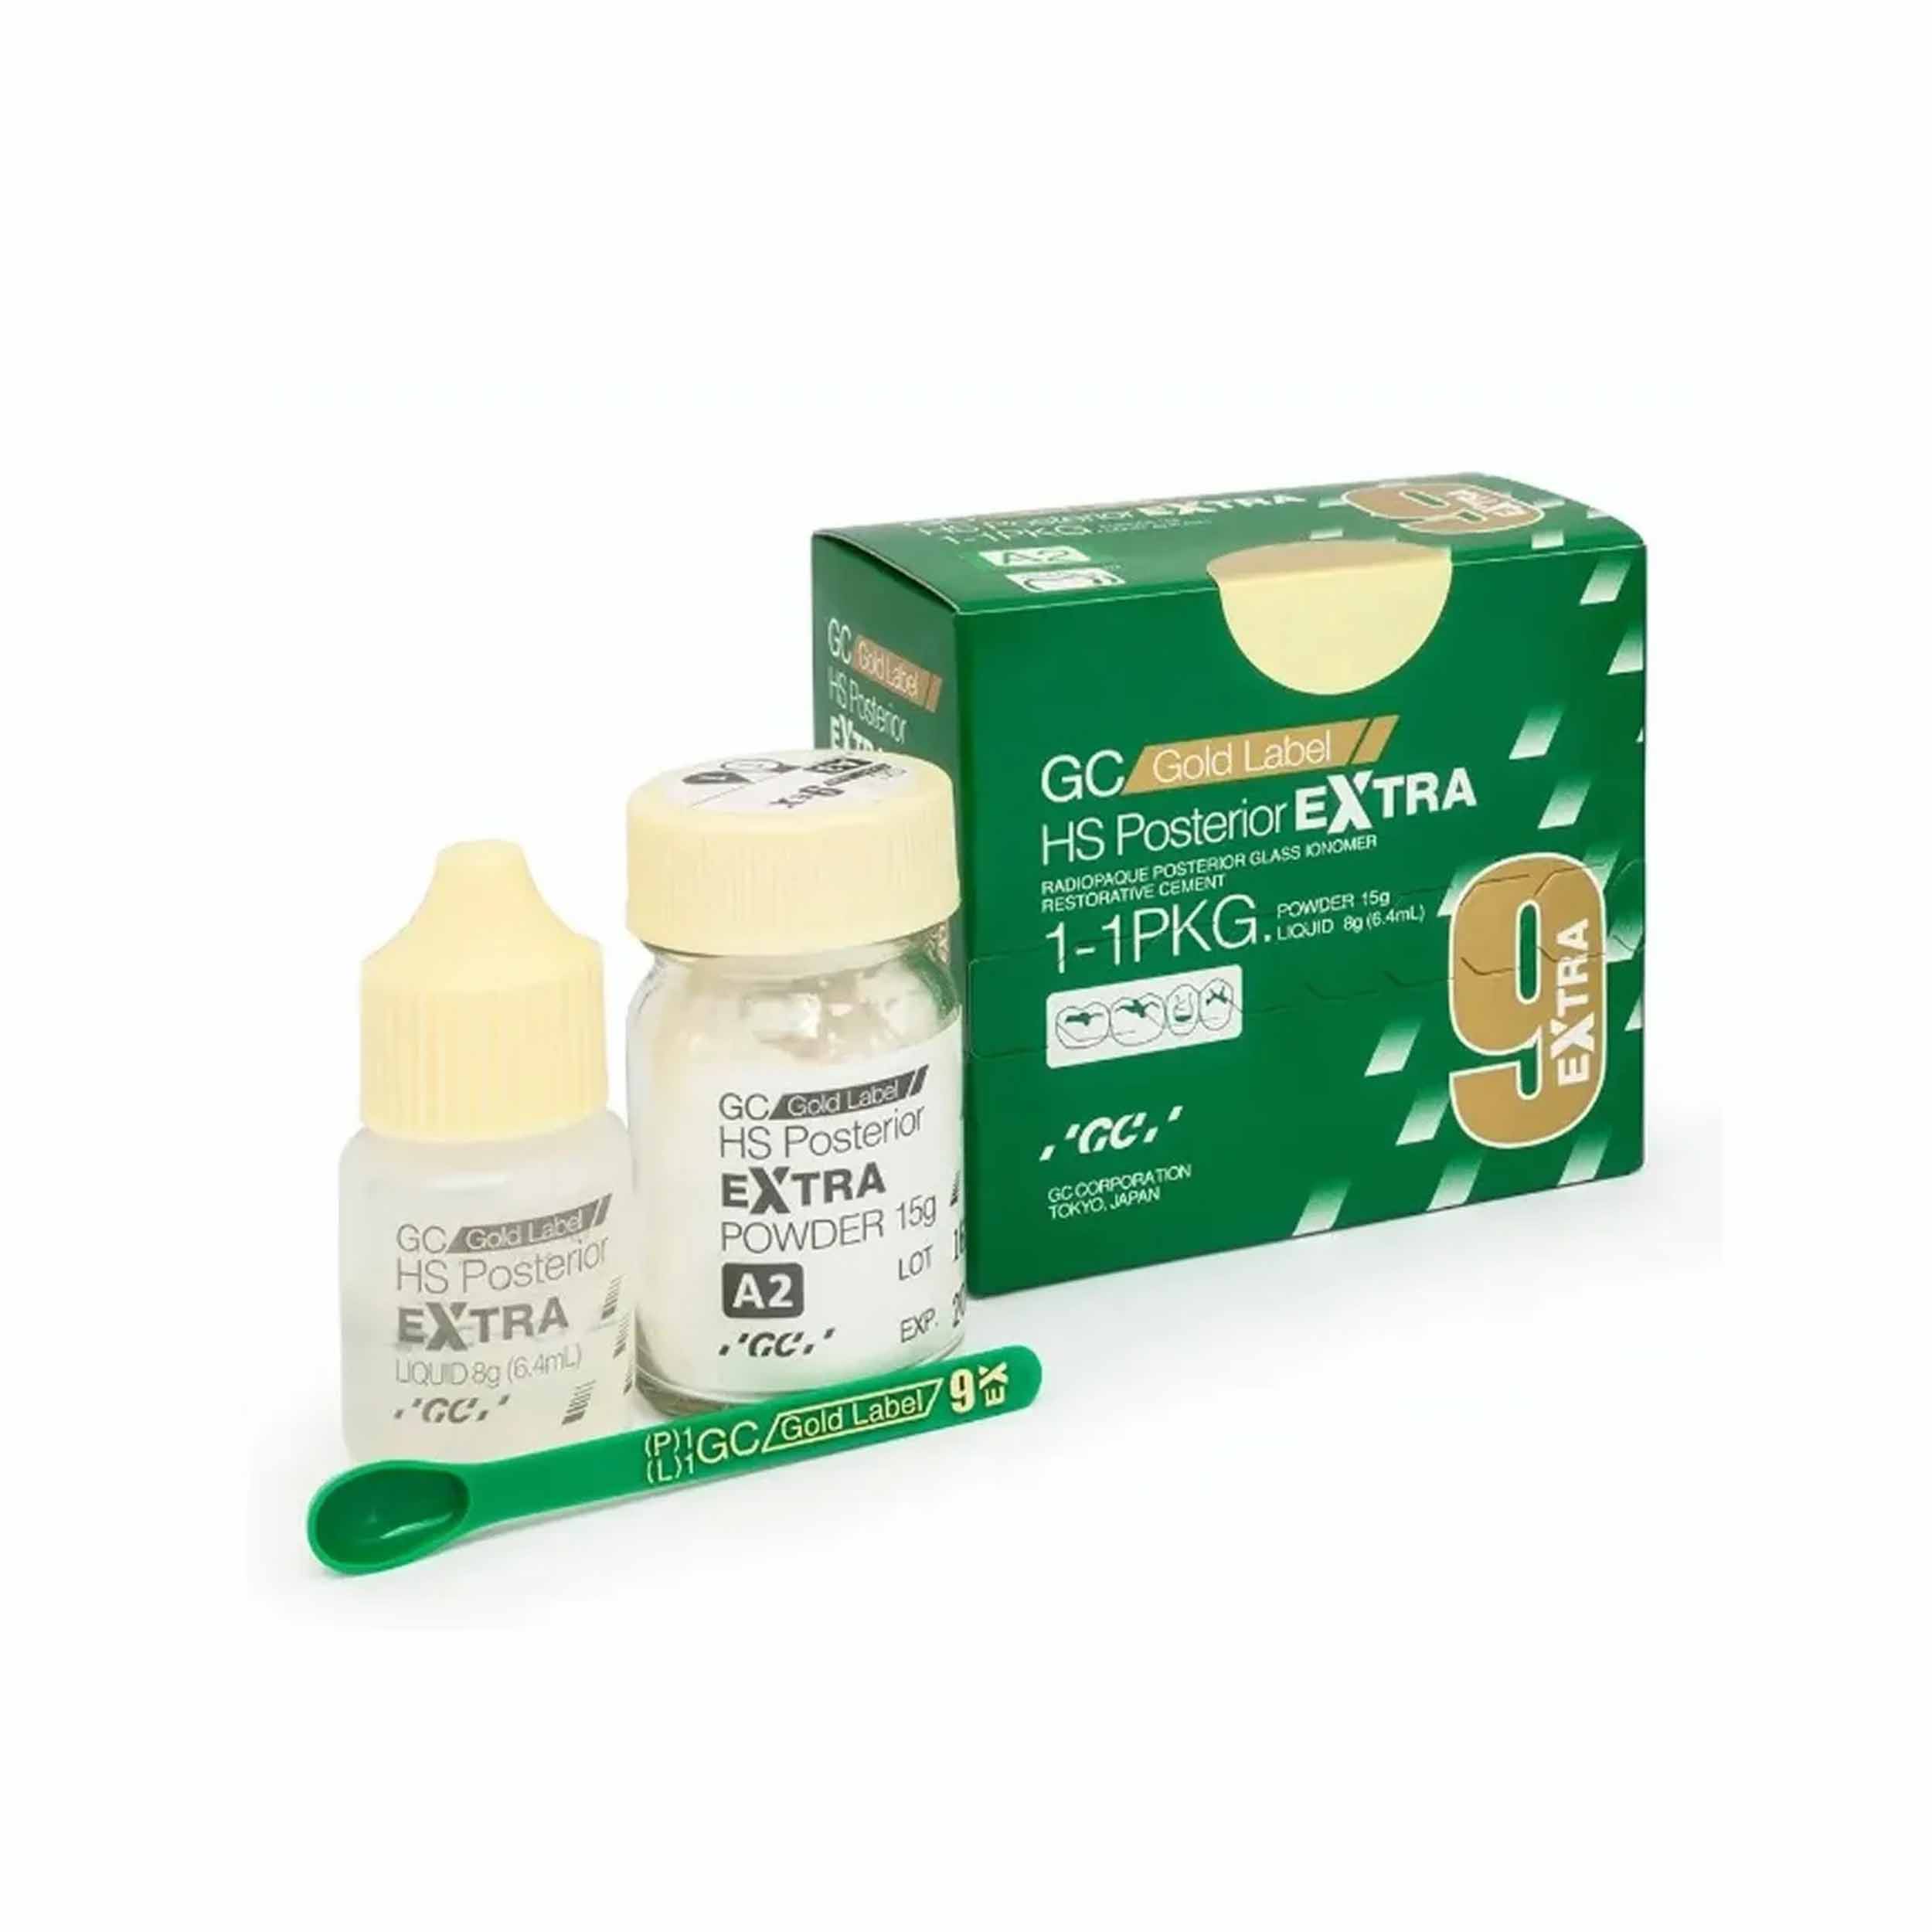 GC Gold Label Type 9 Extra Posterior GI Cement